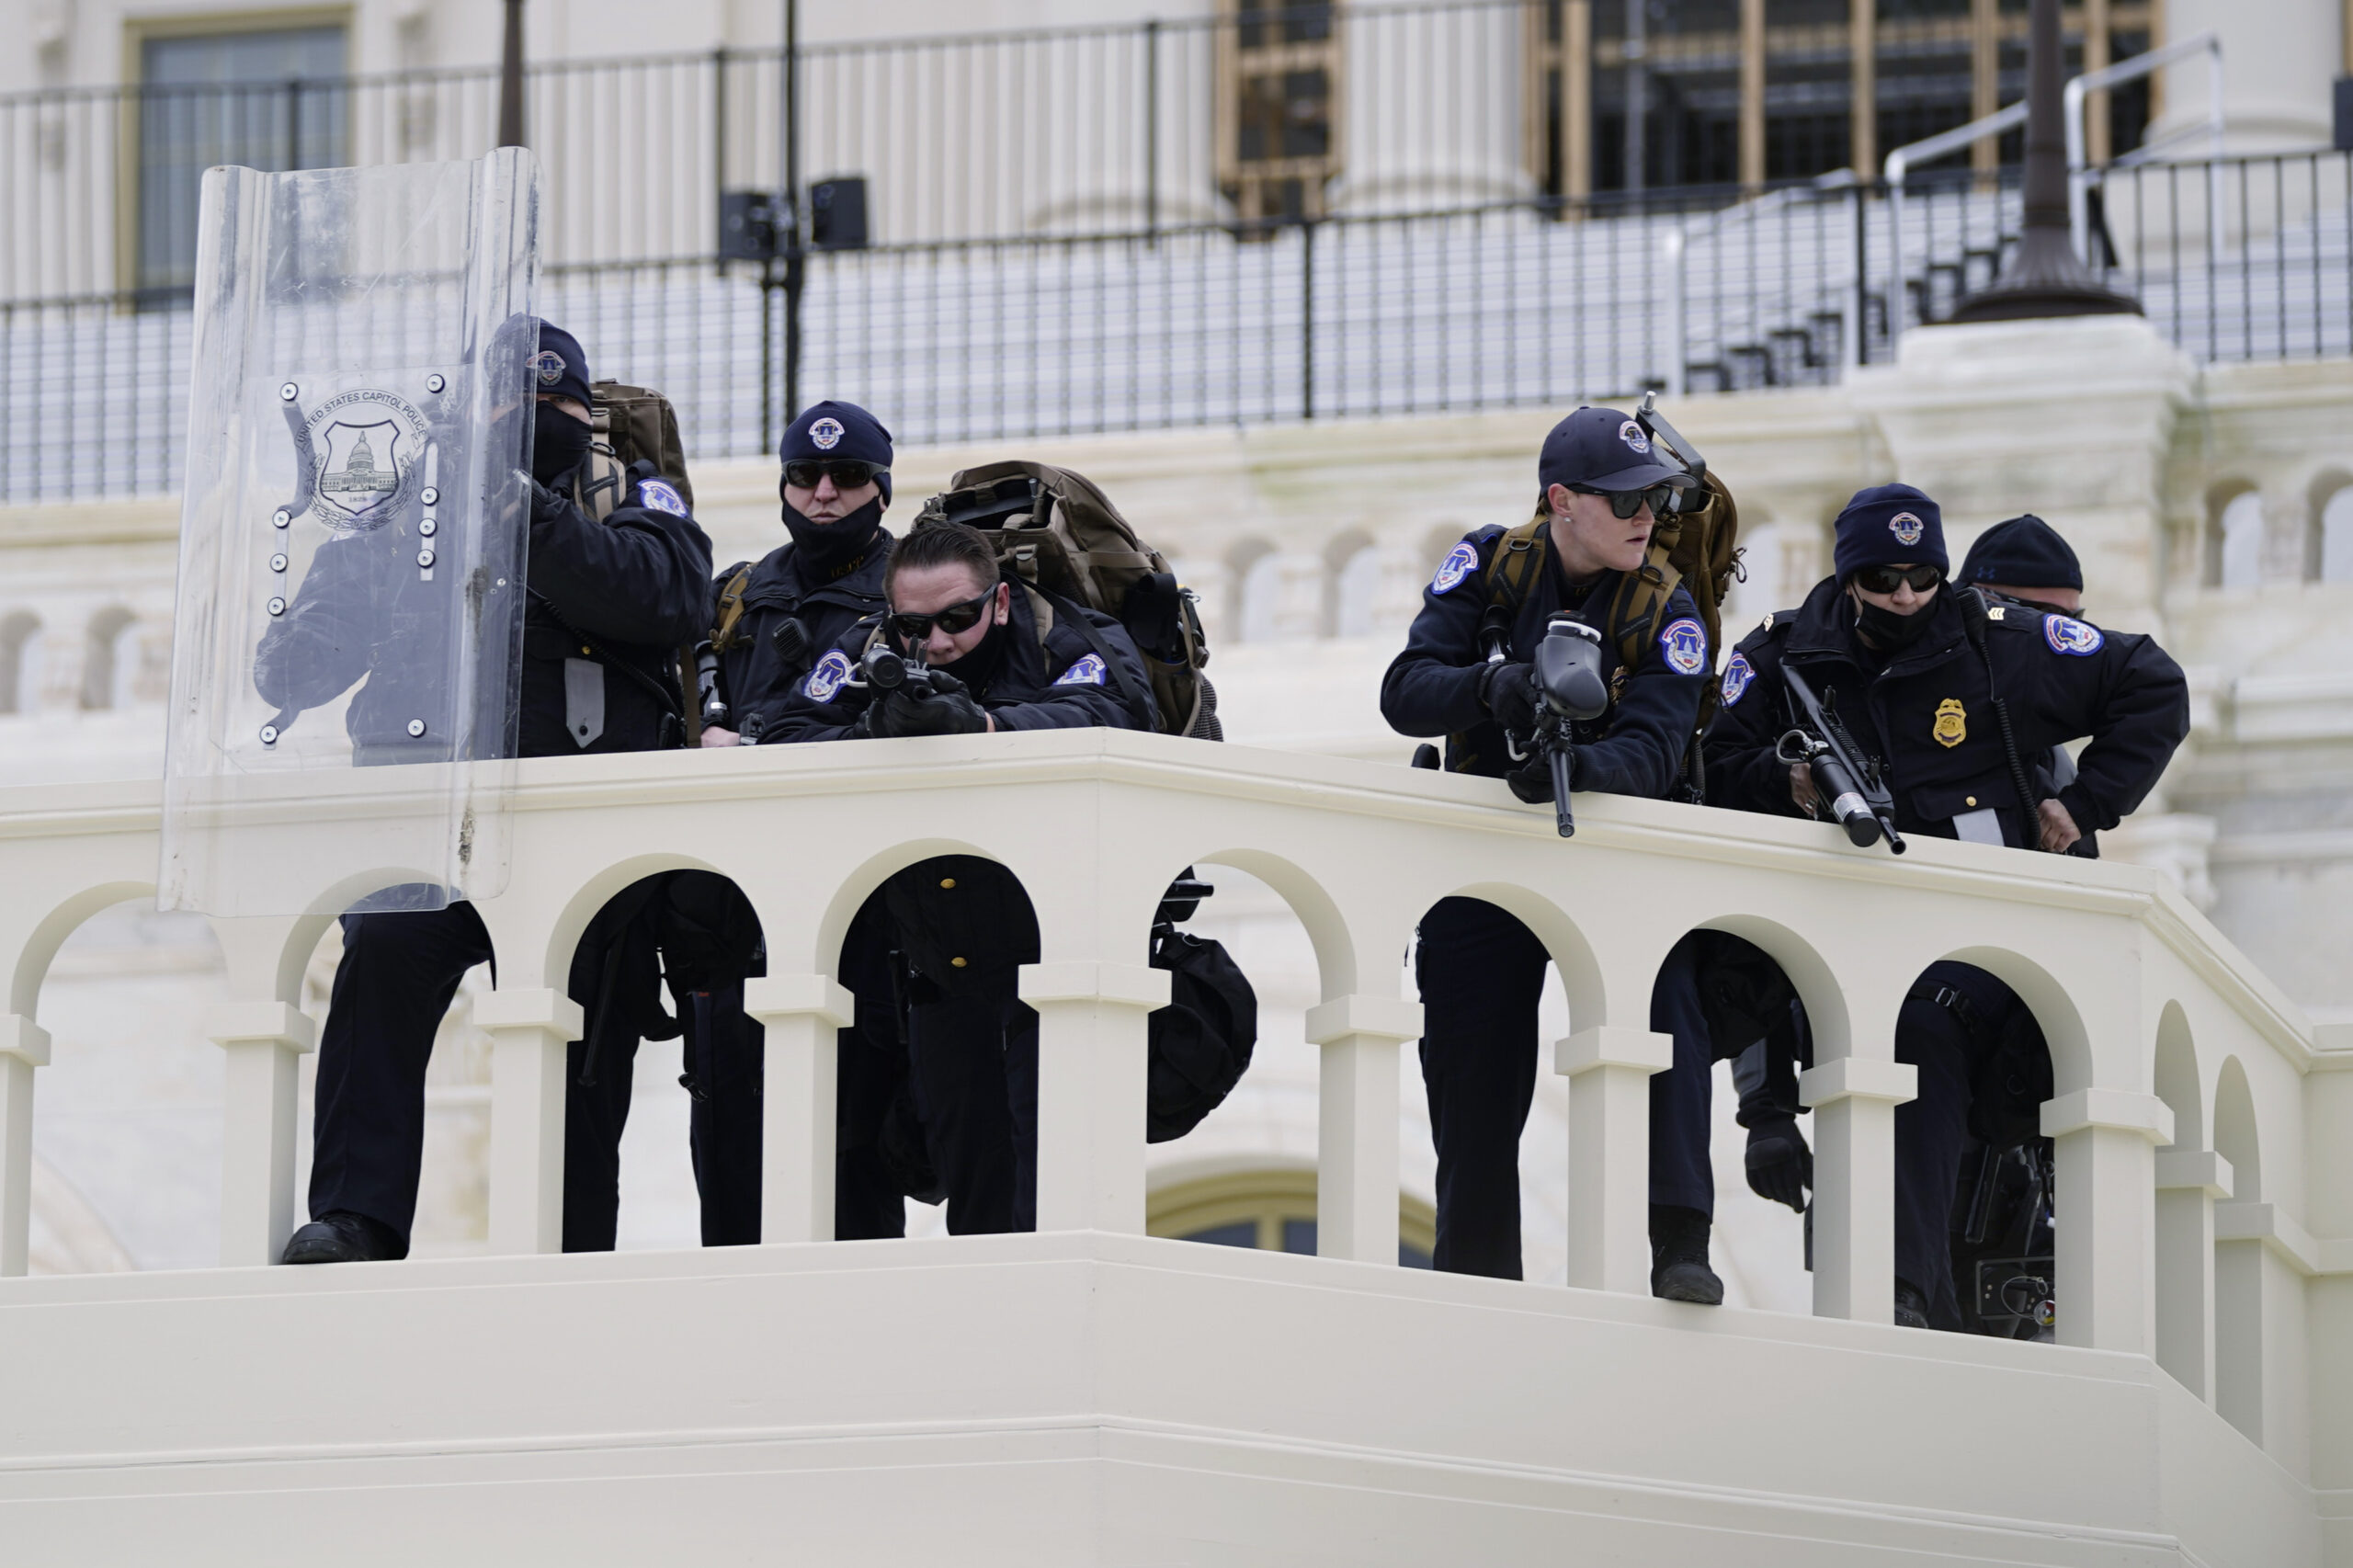 Police keep a watch on demonstrators who tried to break through a police barrier, Wednesday, Jan. 6, 2021